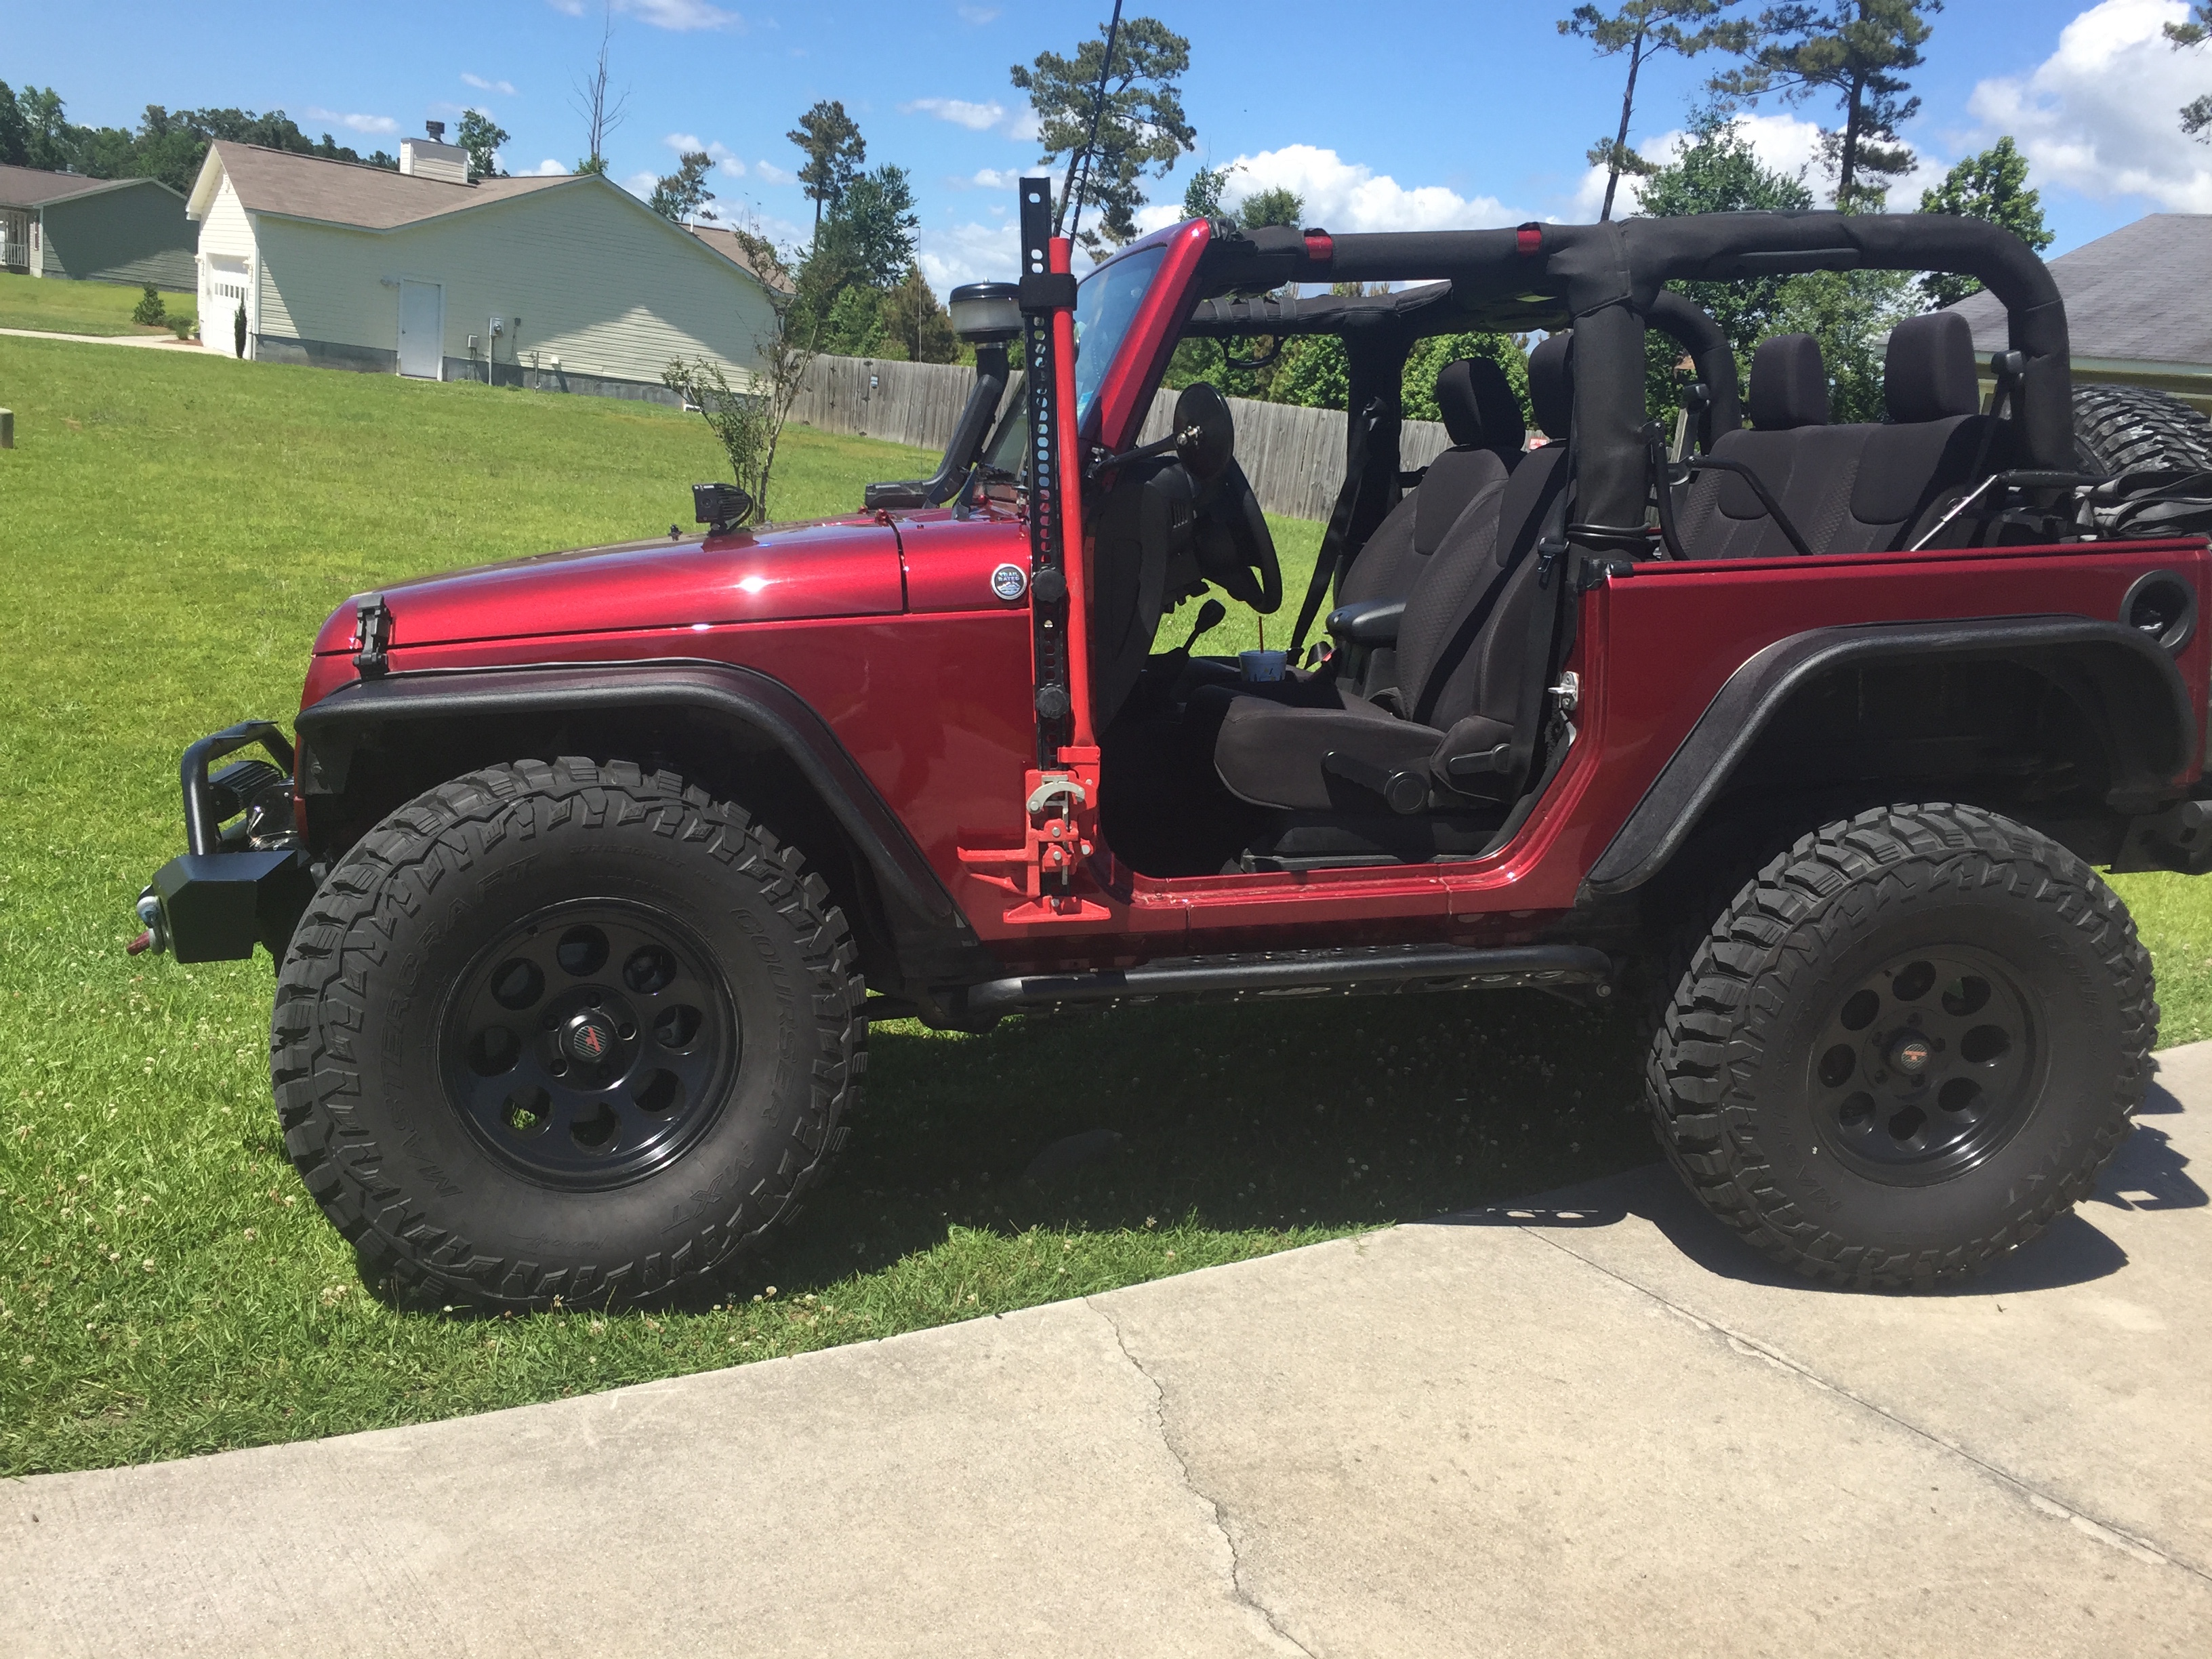 Tires...(Goodyear Duratrac, Courser MXT, Nitto Ridge Grappler) on Stock  Sahara Wheels - Page 3  - The top destination for Jeep JK and  JL Wrangler news, rumors, and discussion